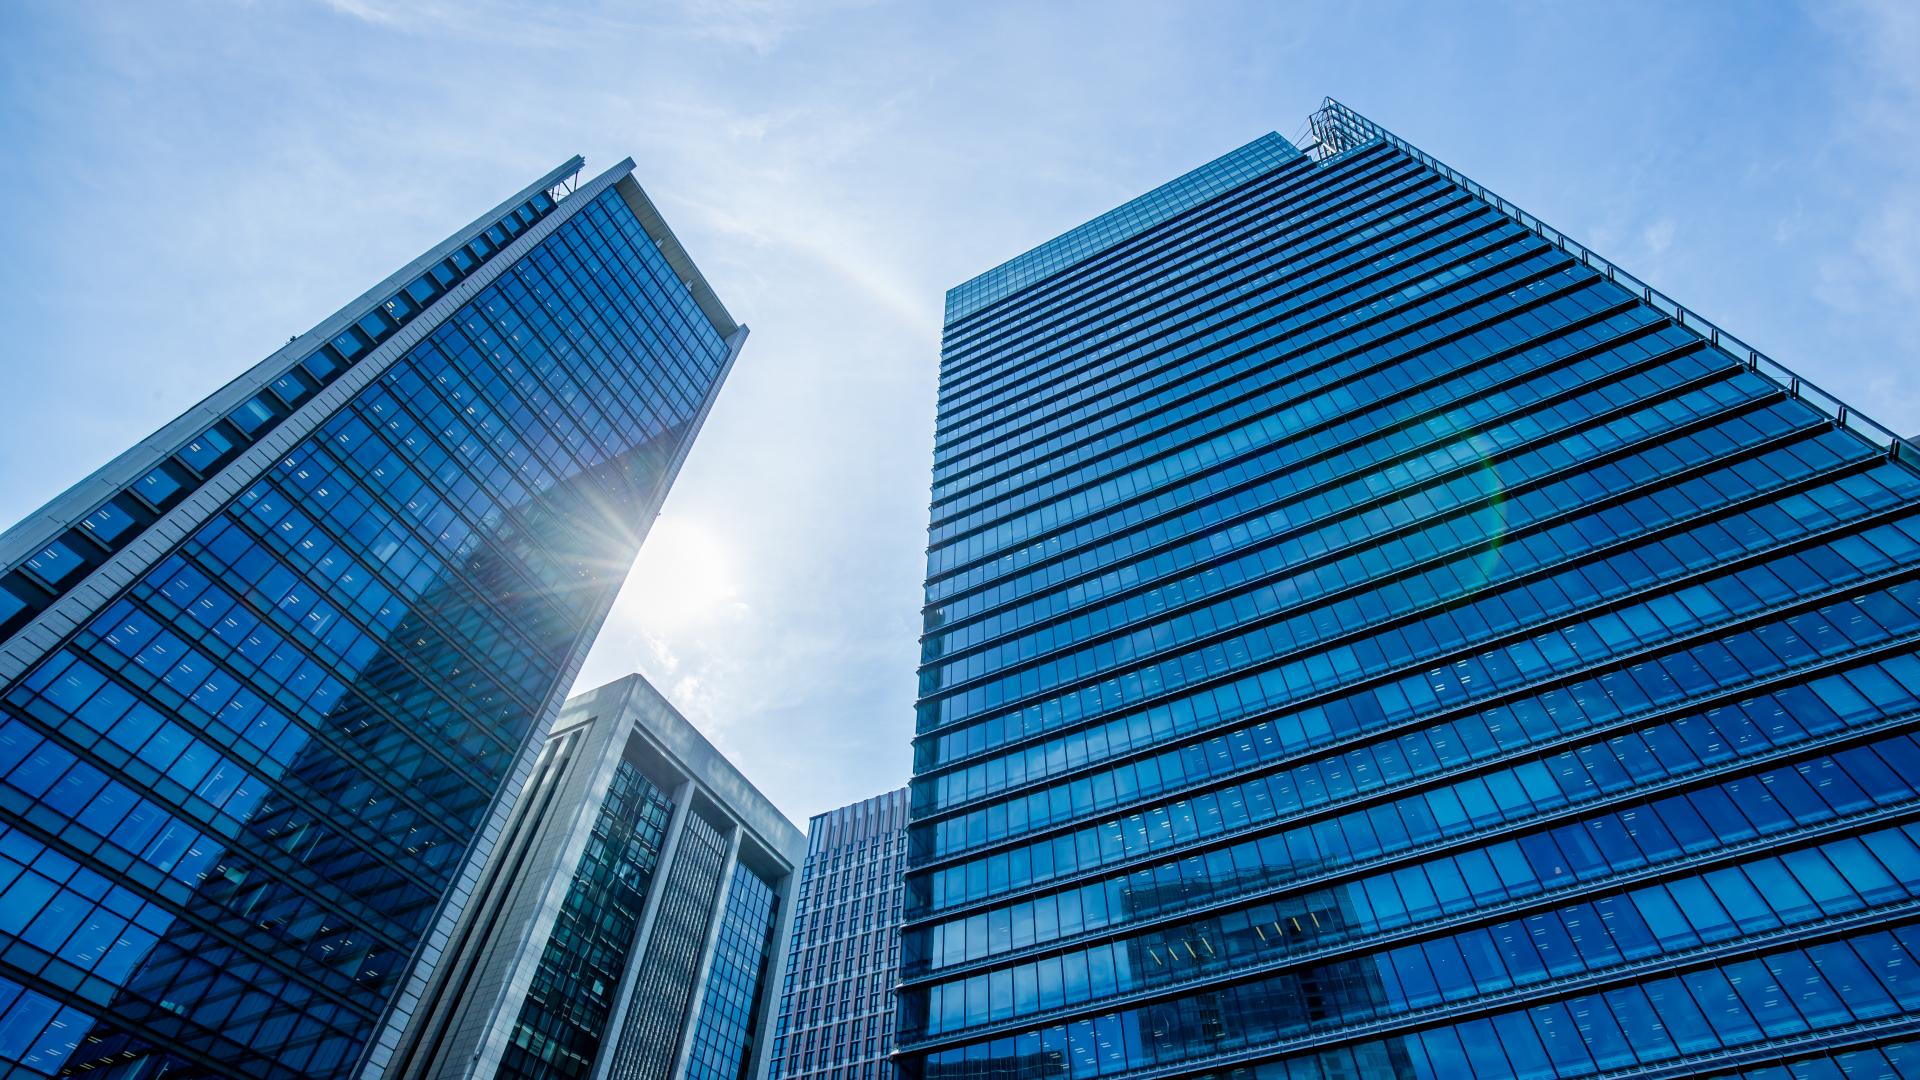 Image of tall glass buildings